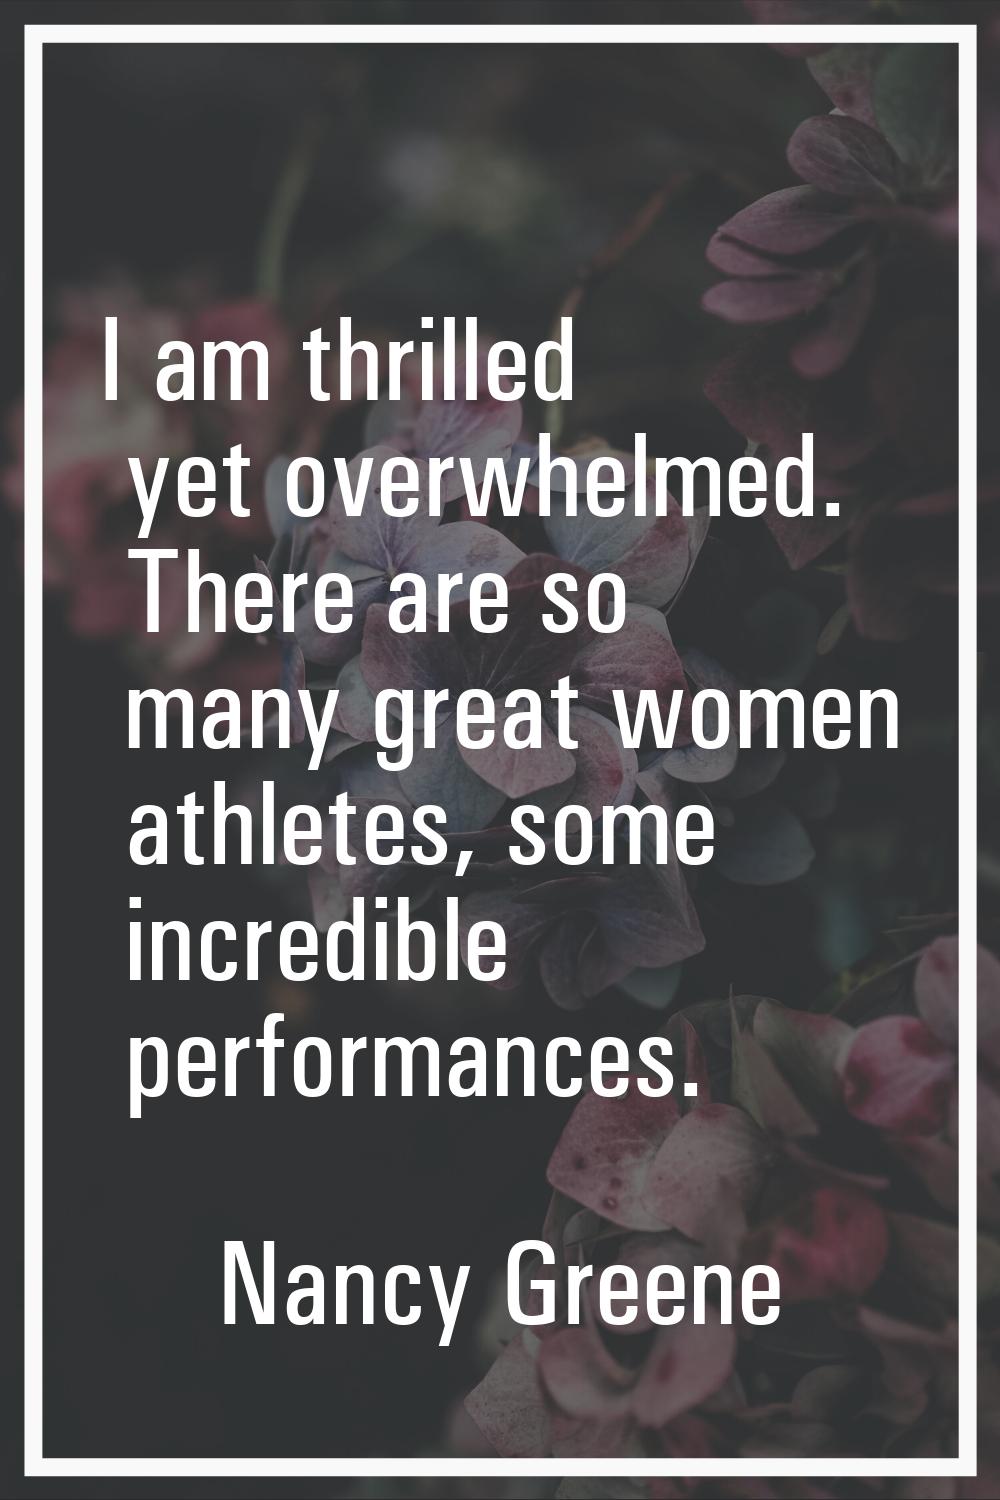 I am thrilled yet overwhelmed. There are so many great women athletes, some incredible performances